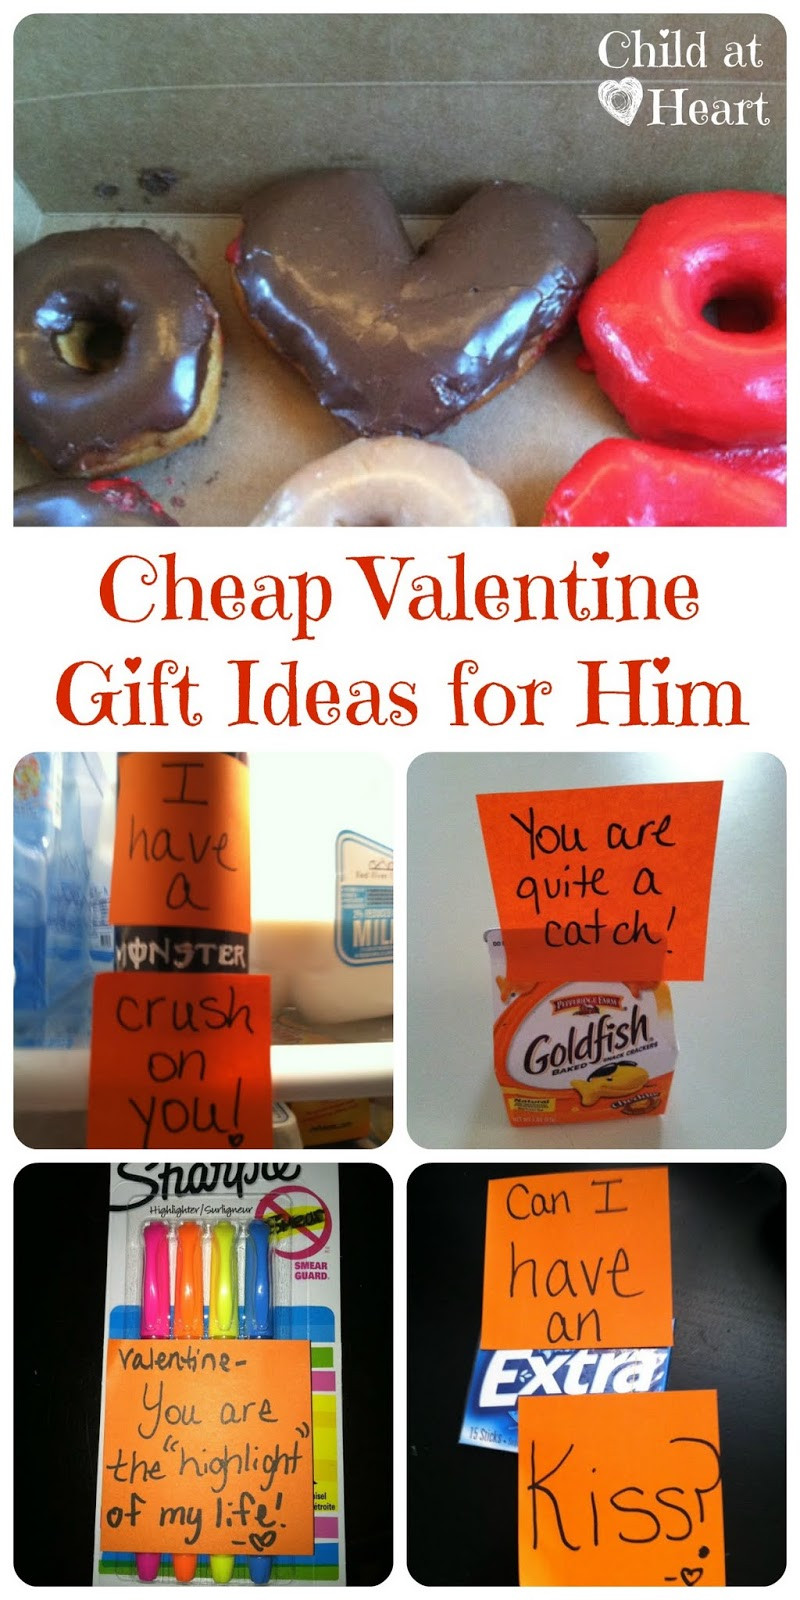 Valentine Day Gift Ideas Inexpensive
 Cheap Valentine Gift Ideas for Him Child at Heart Blog